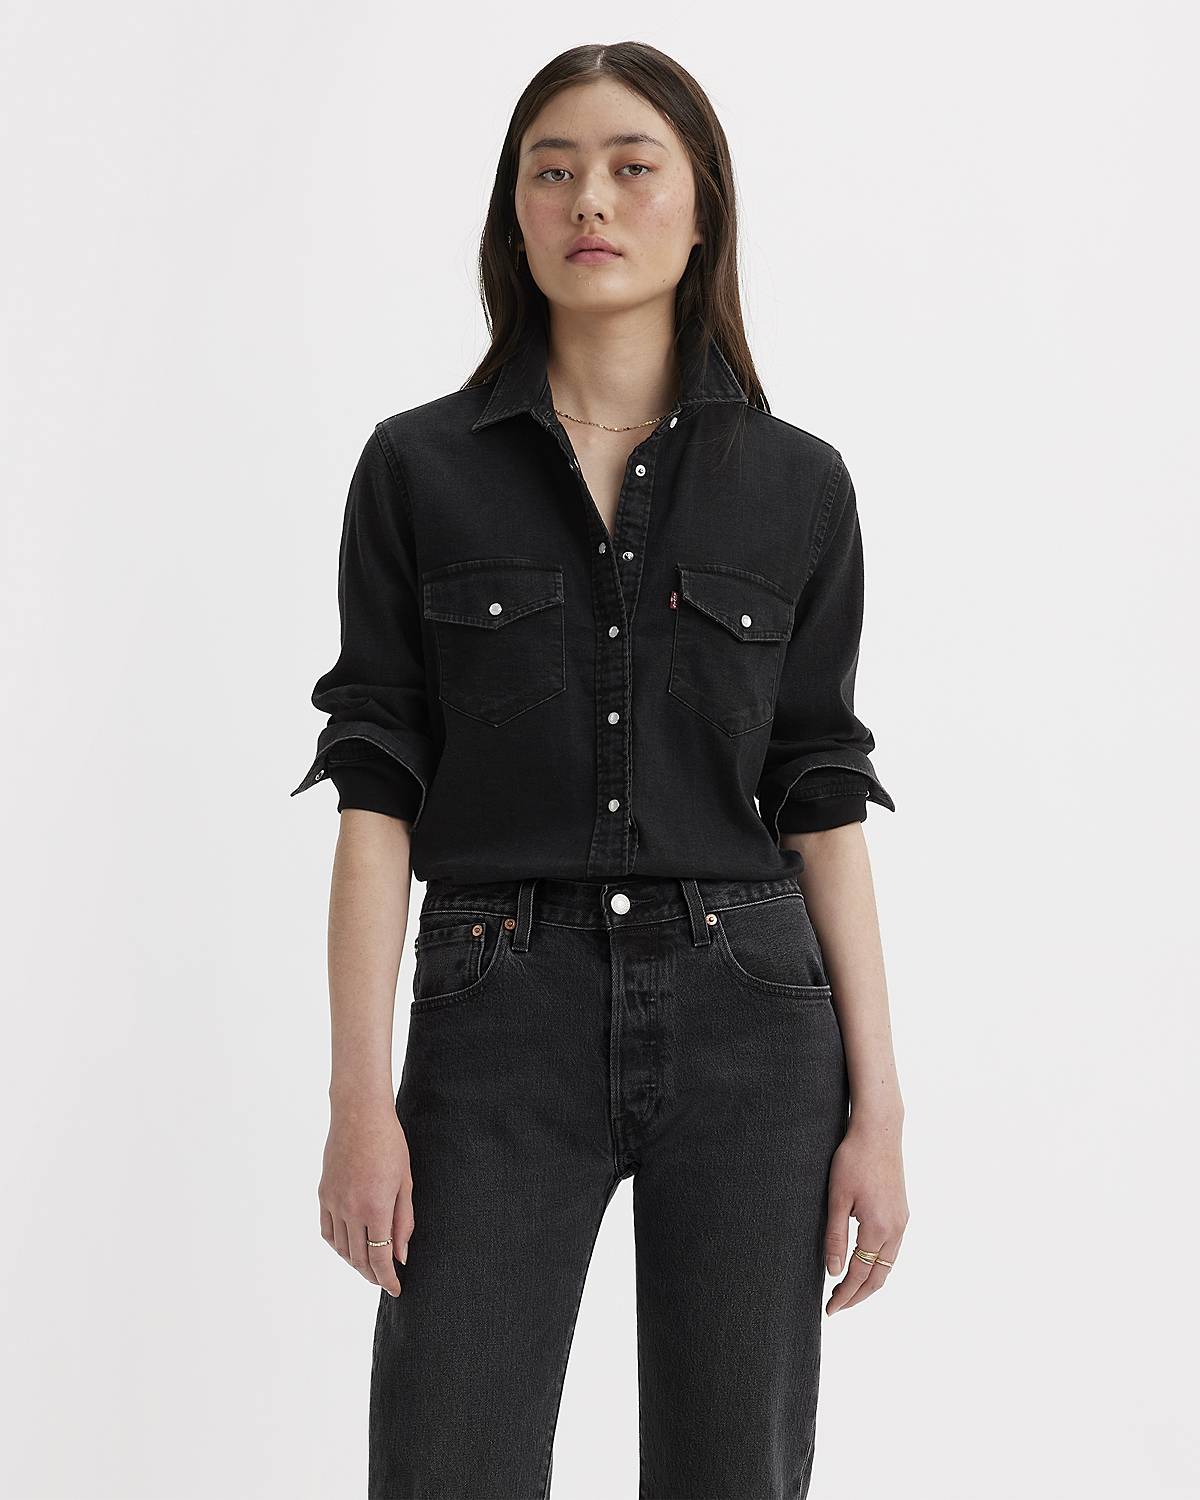 Model wearing black western button-up top.